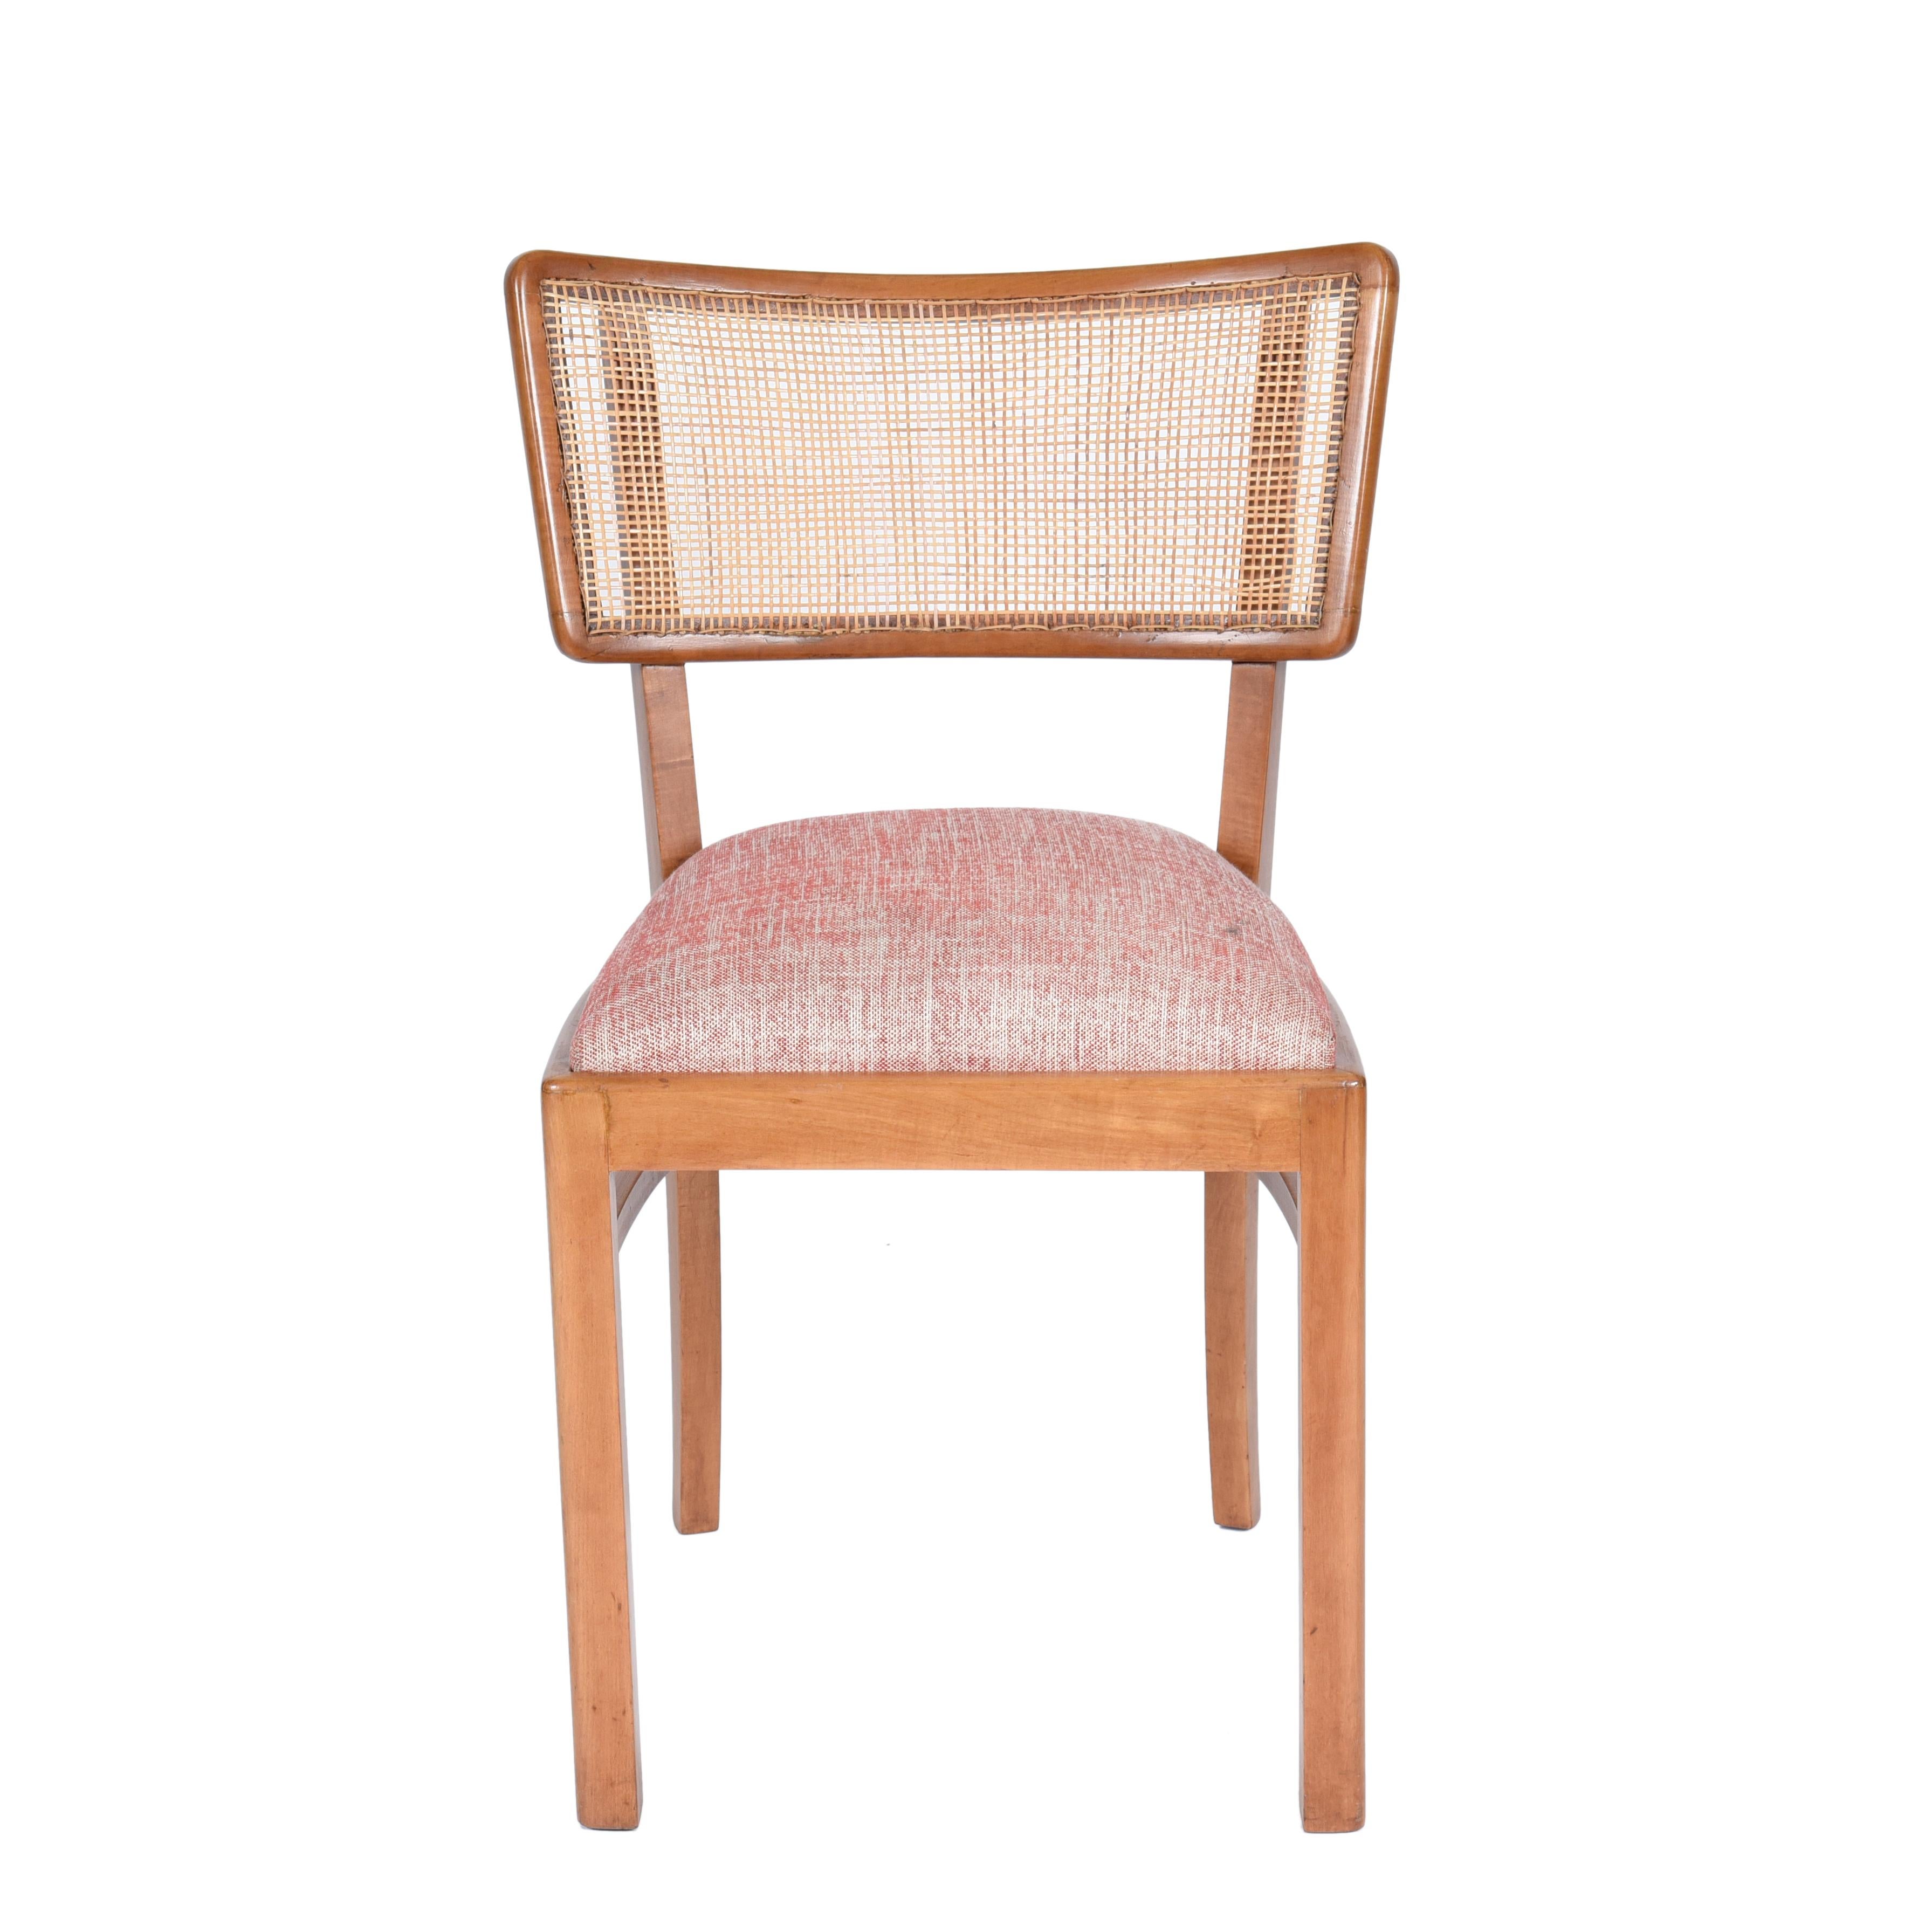 Midcentury Brazilian Chair in Ivory Wood and Straw, 1960s